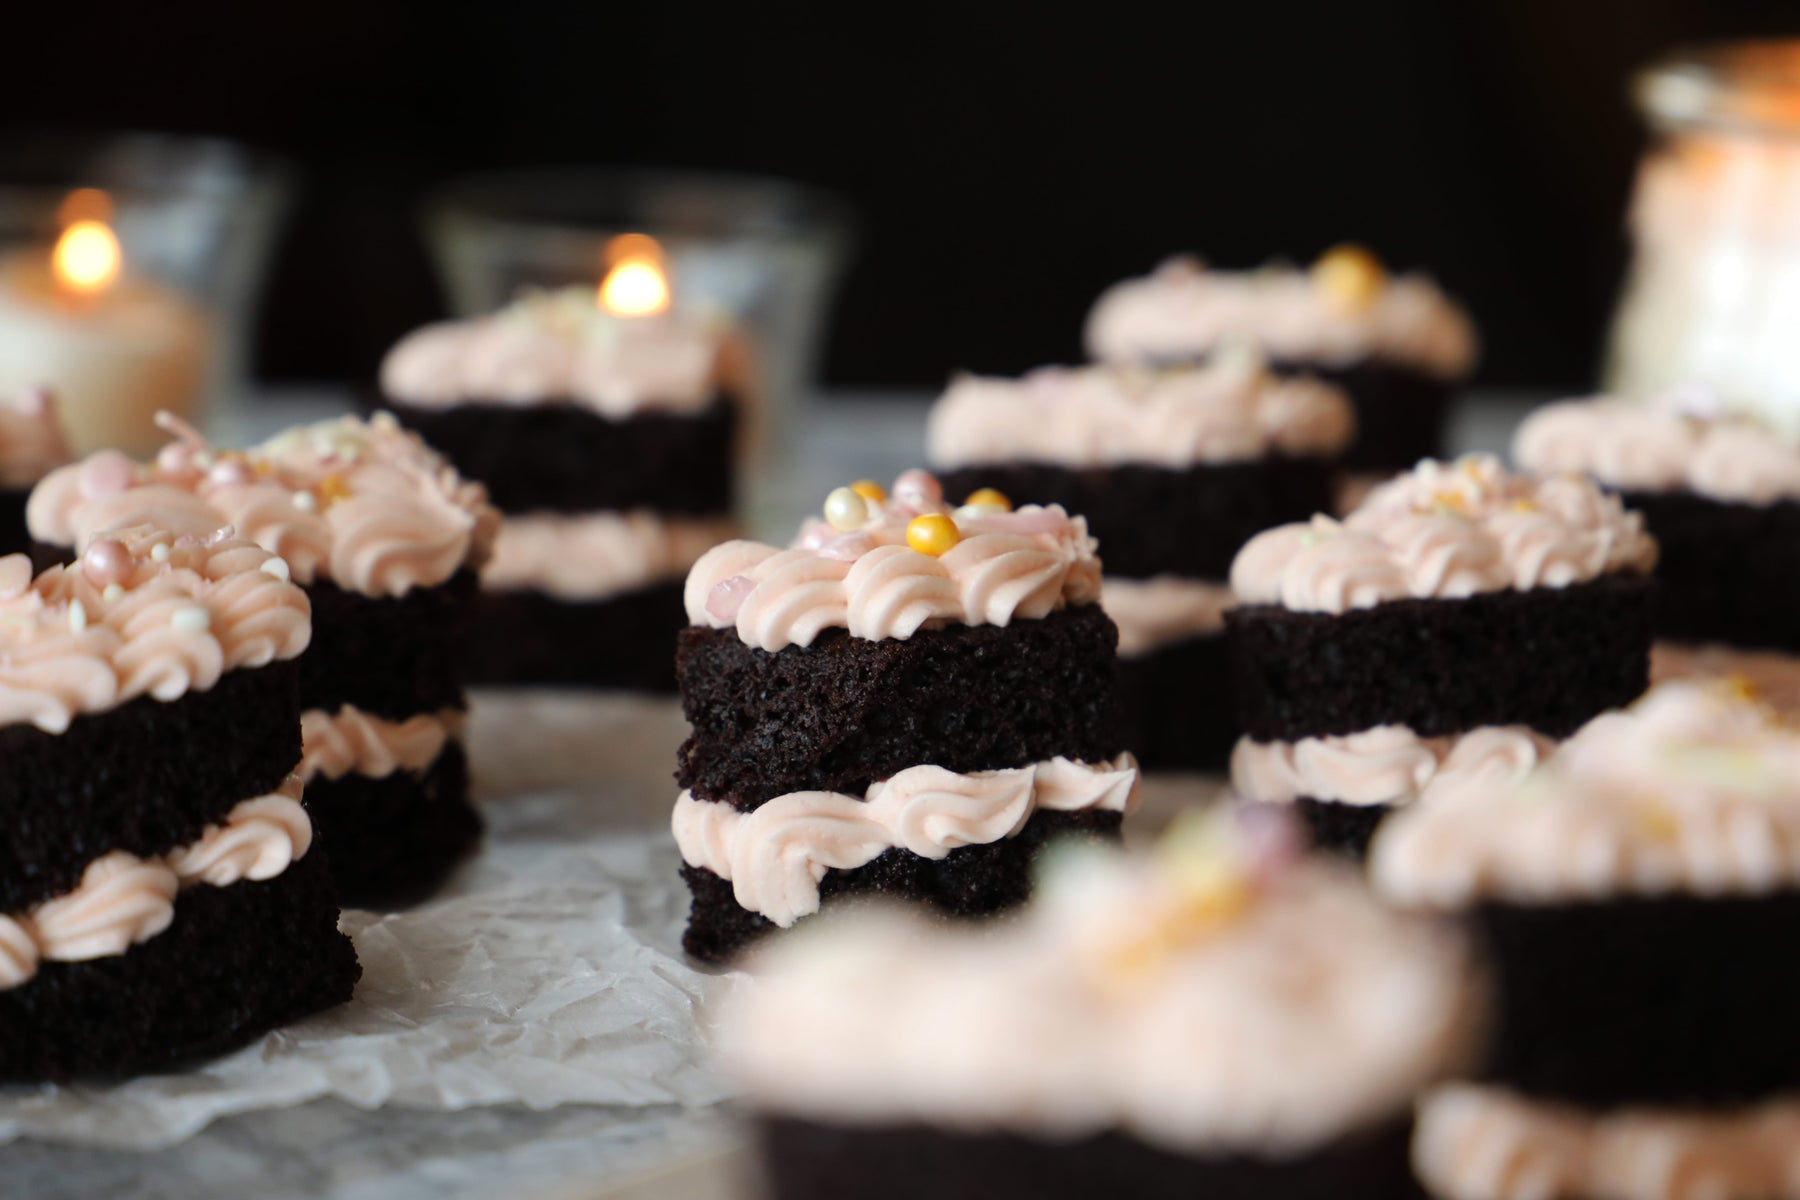 Chocolate Heart Cakes with Almond Marzipan Frosting